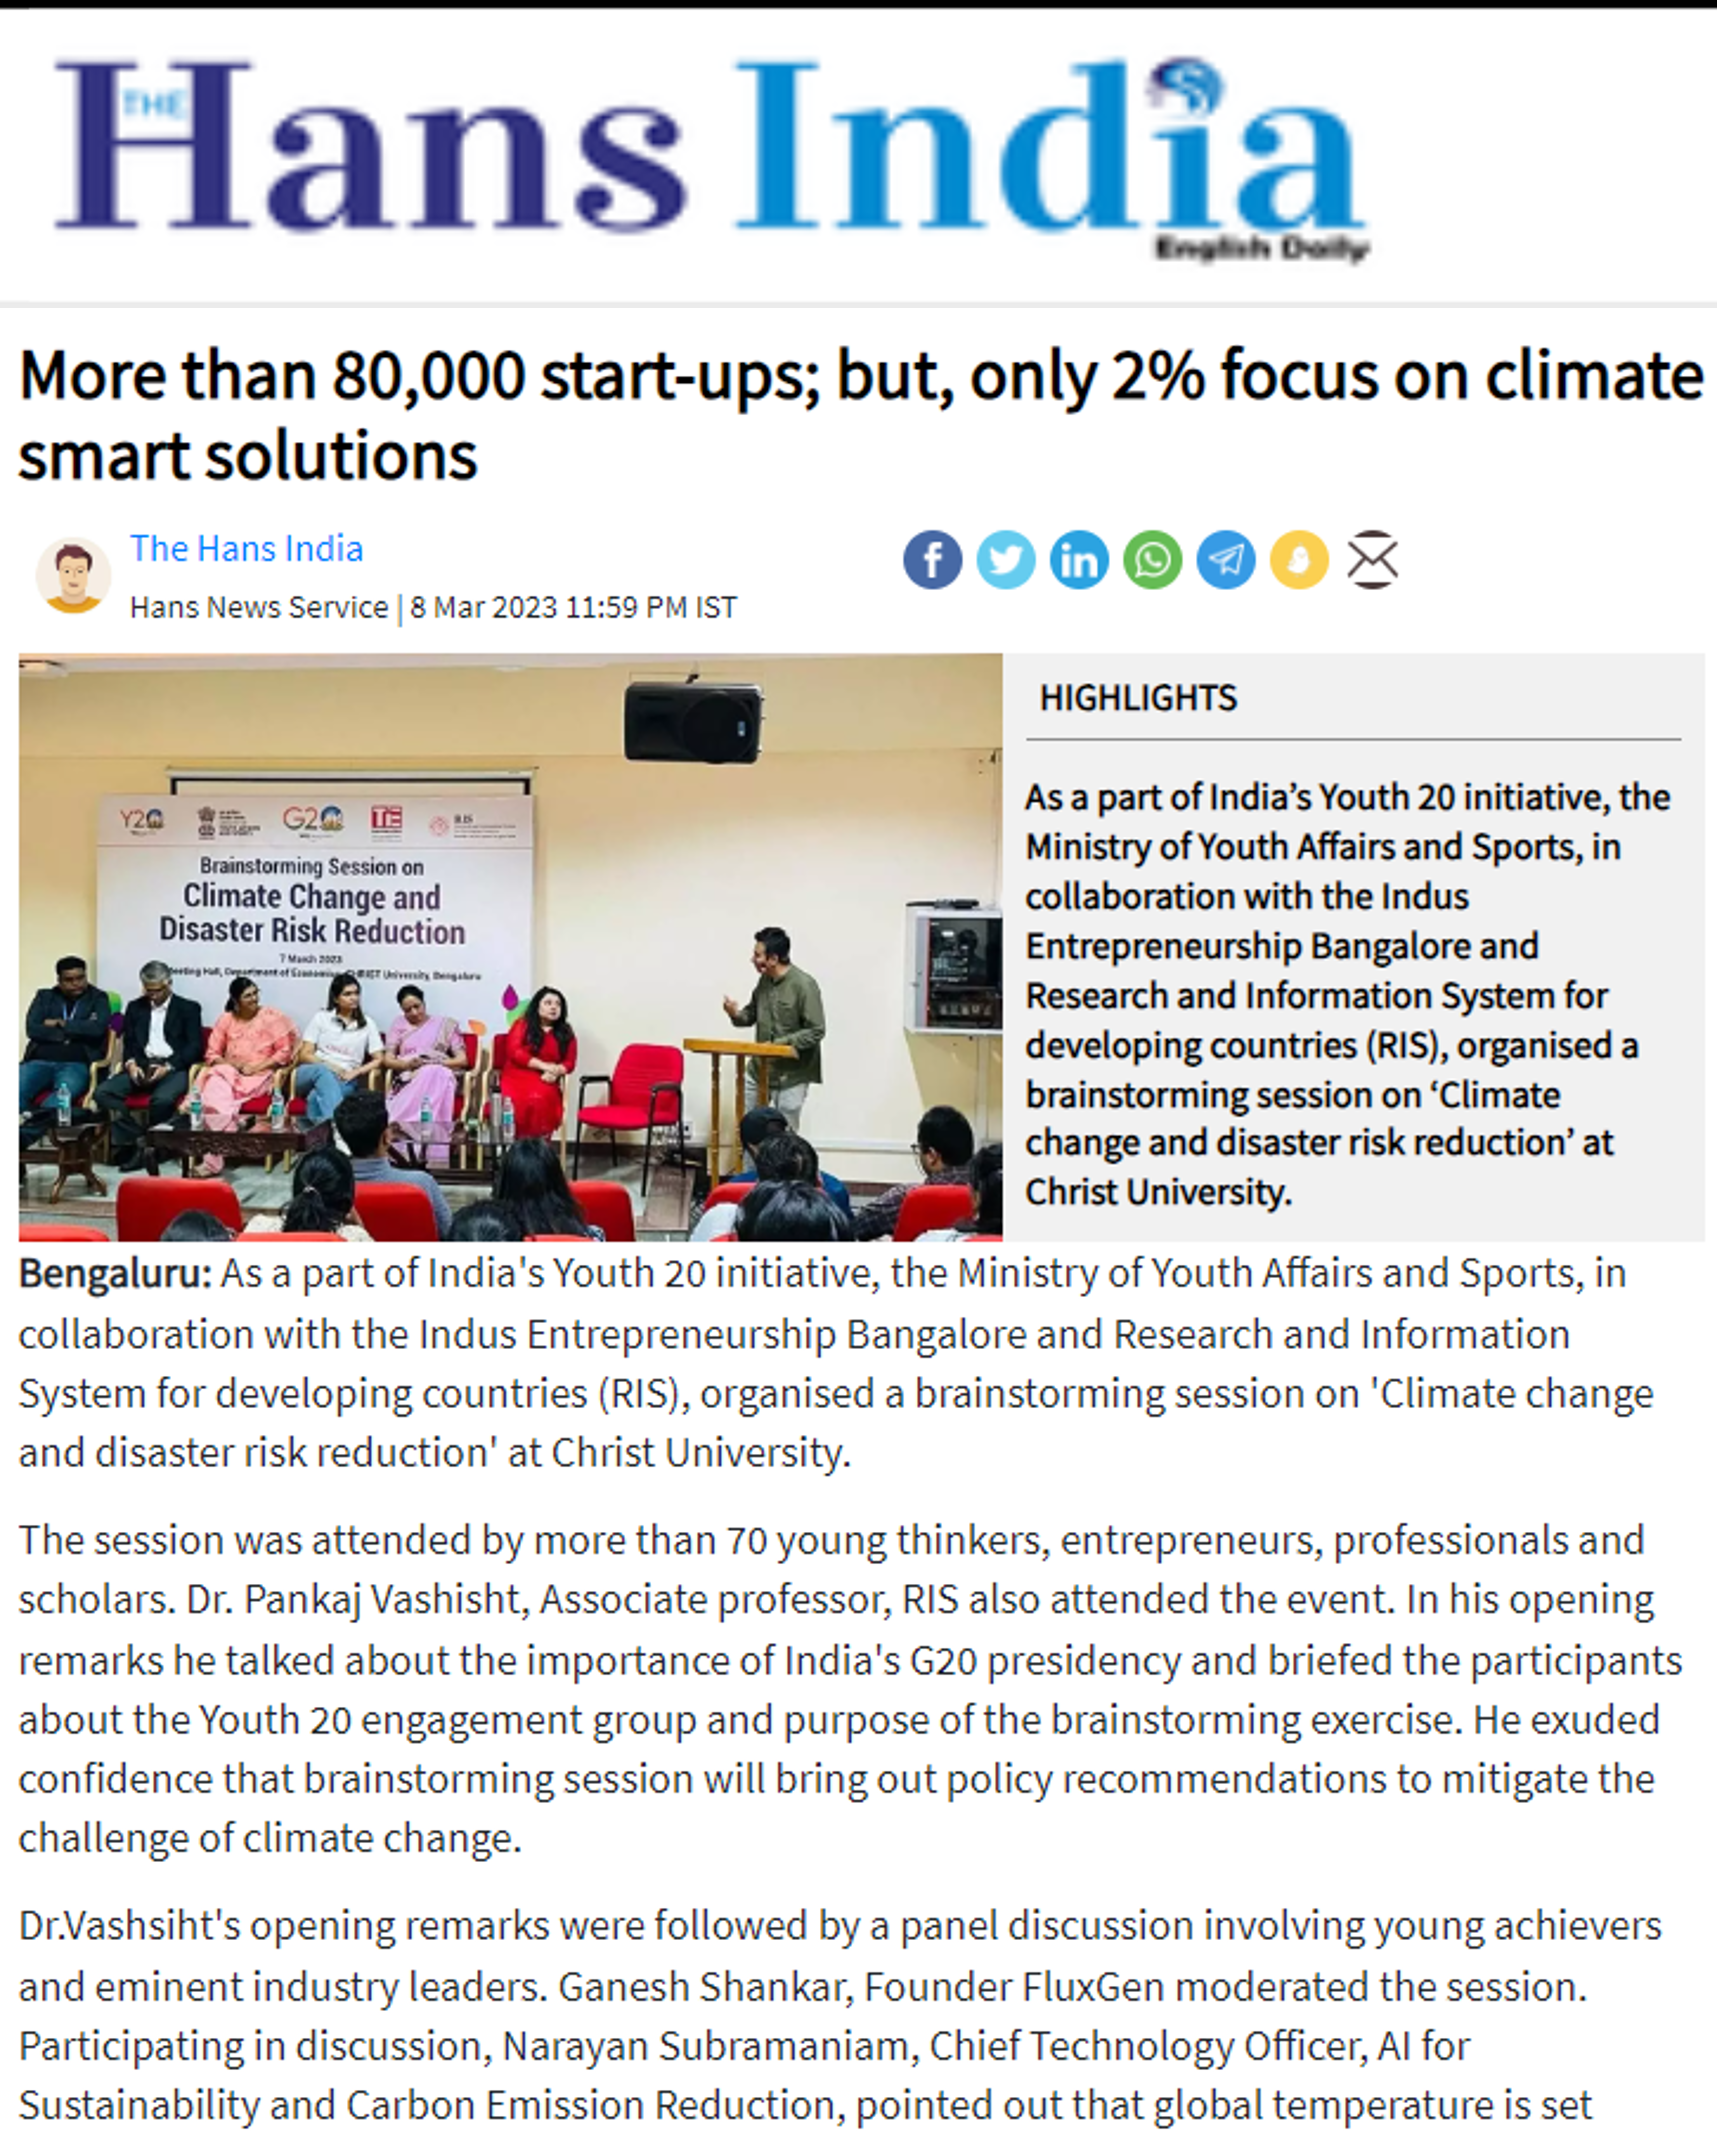 Dr Indu K Murthy’s perspective on the impact of climate change on women mentioned by The Hans India